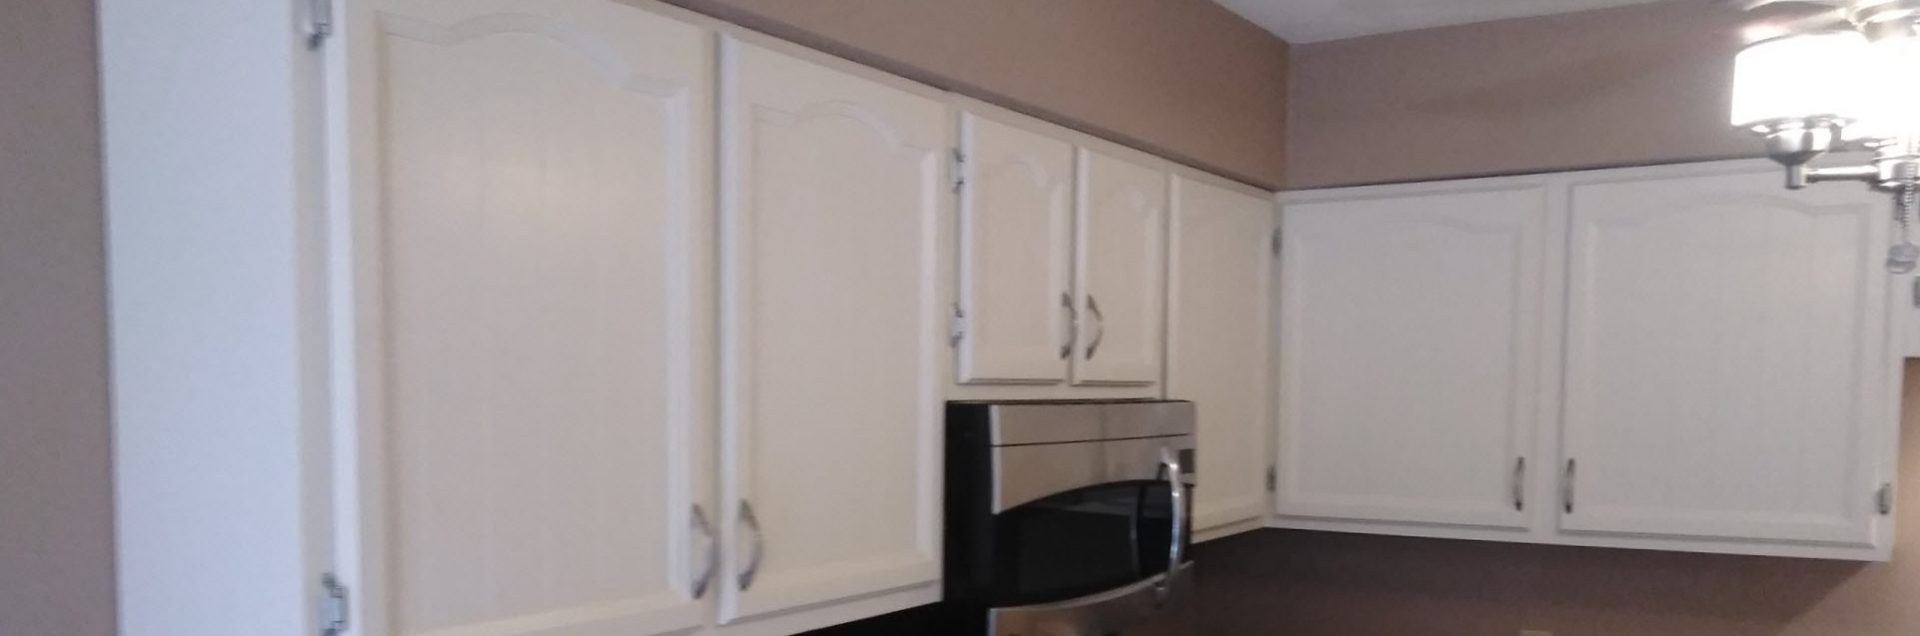 Kitchen Cabinet Painting With Certapro Painters Of Belleville Il